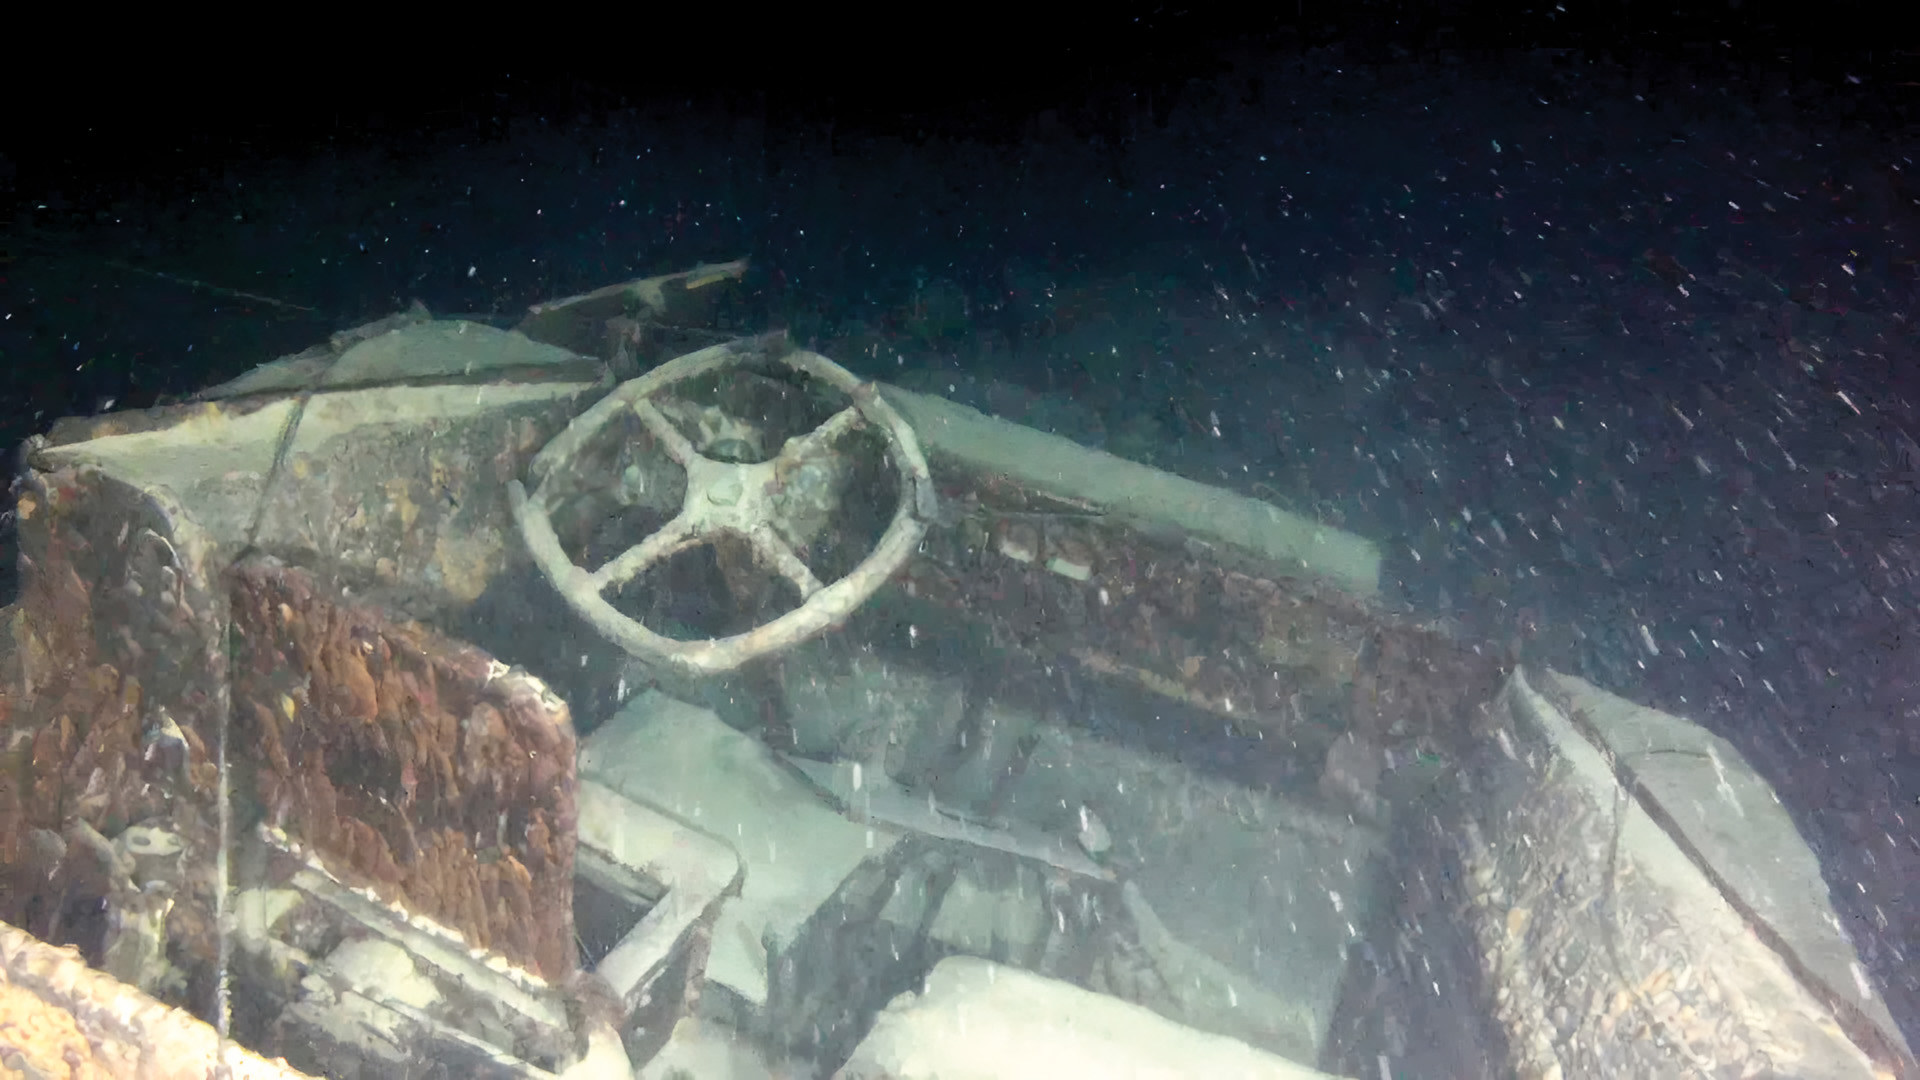 A picture taken by the ROV of the driver’s position on the DUKW. The instrument gauges are still visible although a portion of the dashboard has fallen off. The rubber-coated steering wheel is still largely intact.